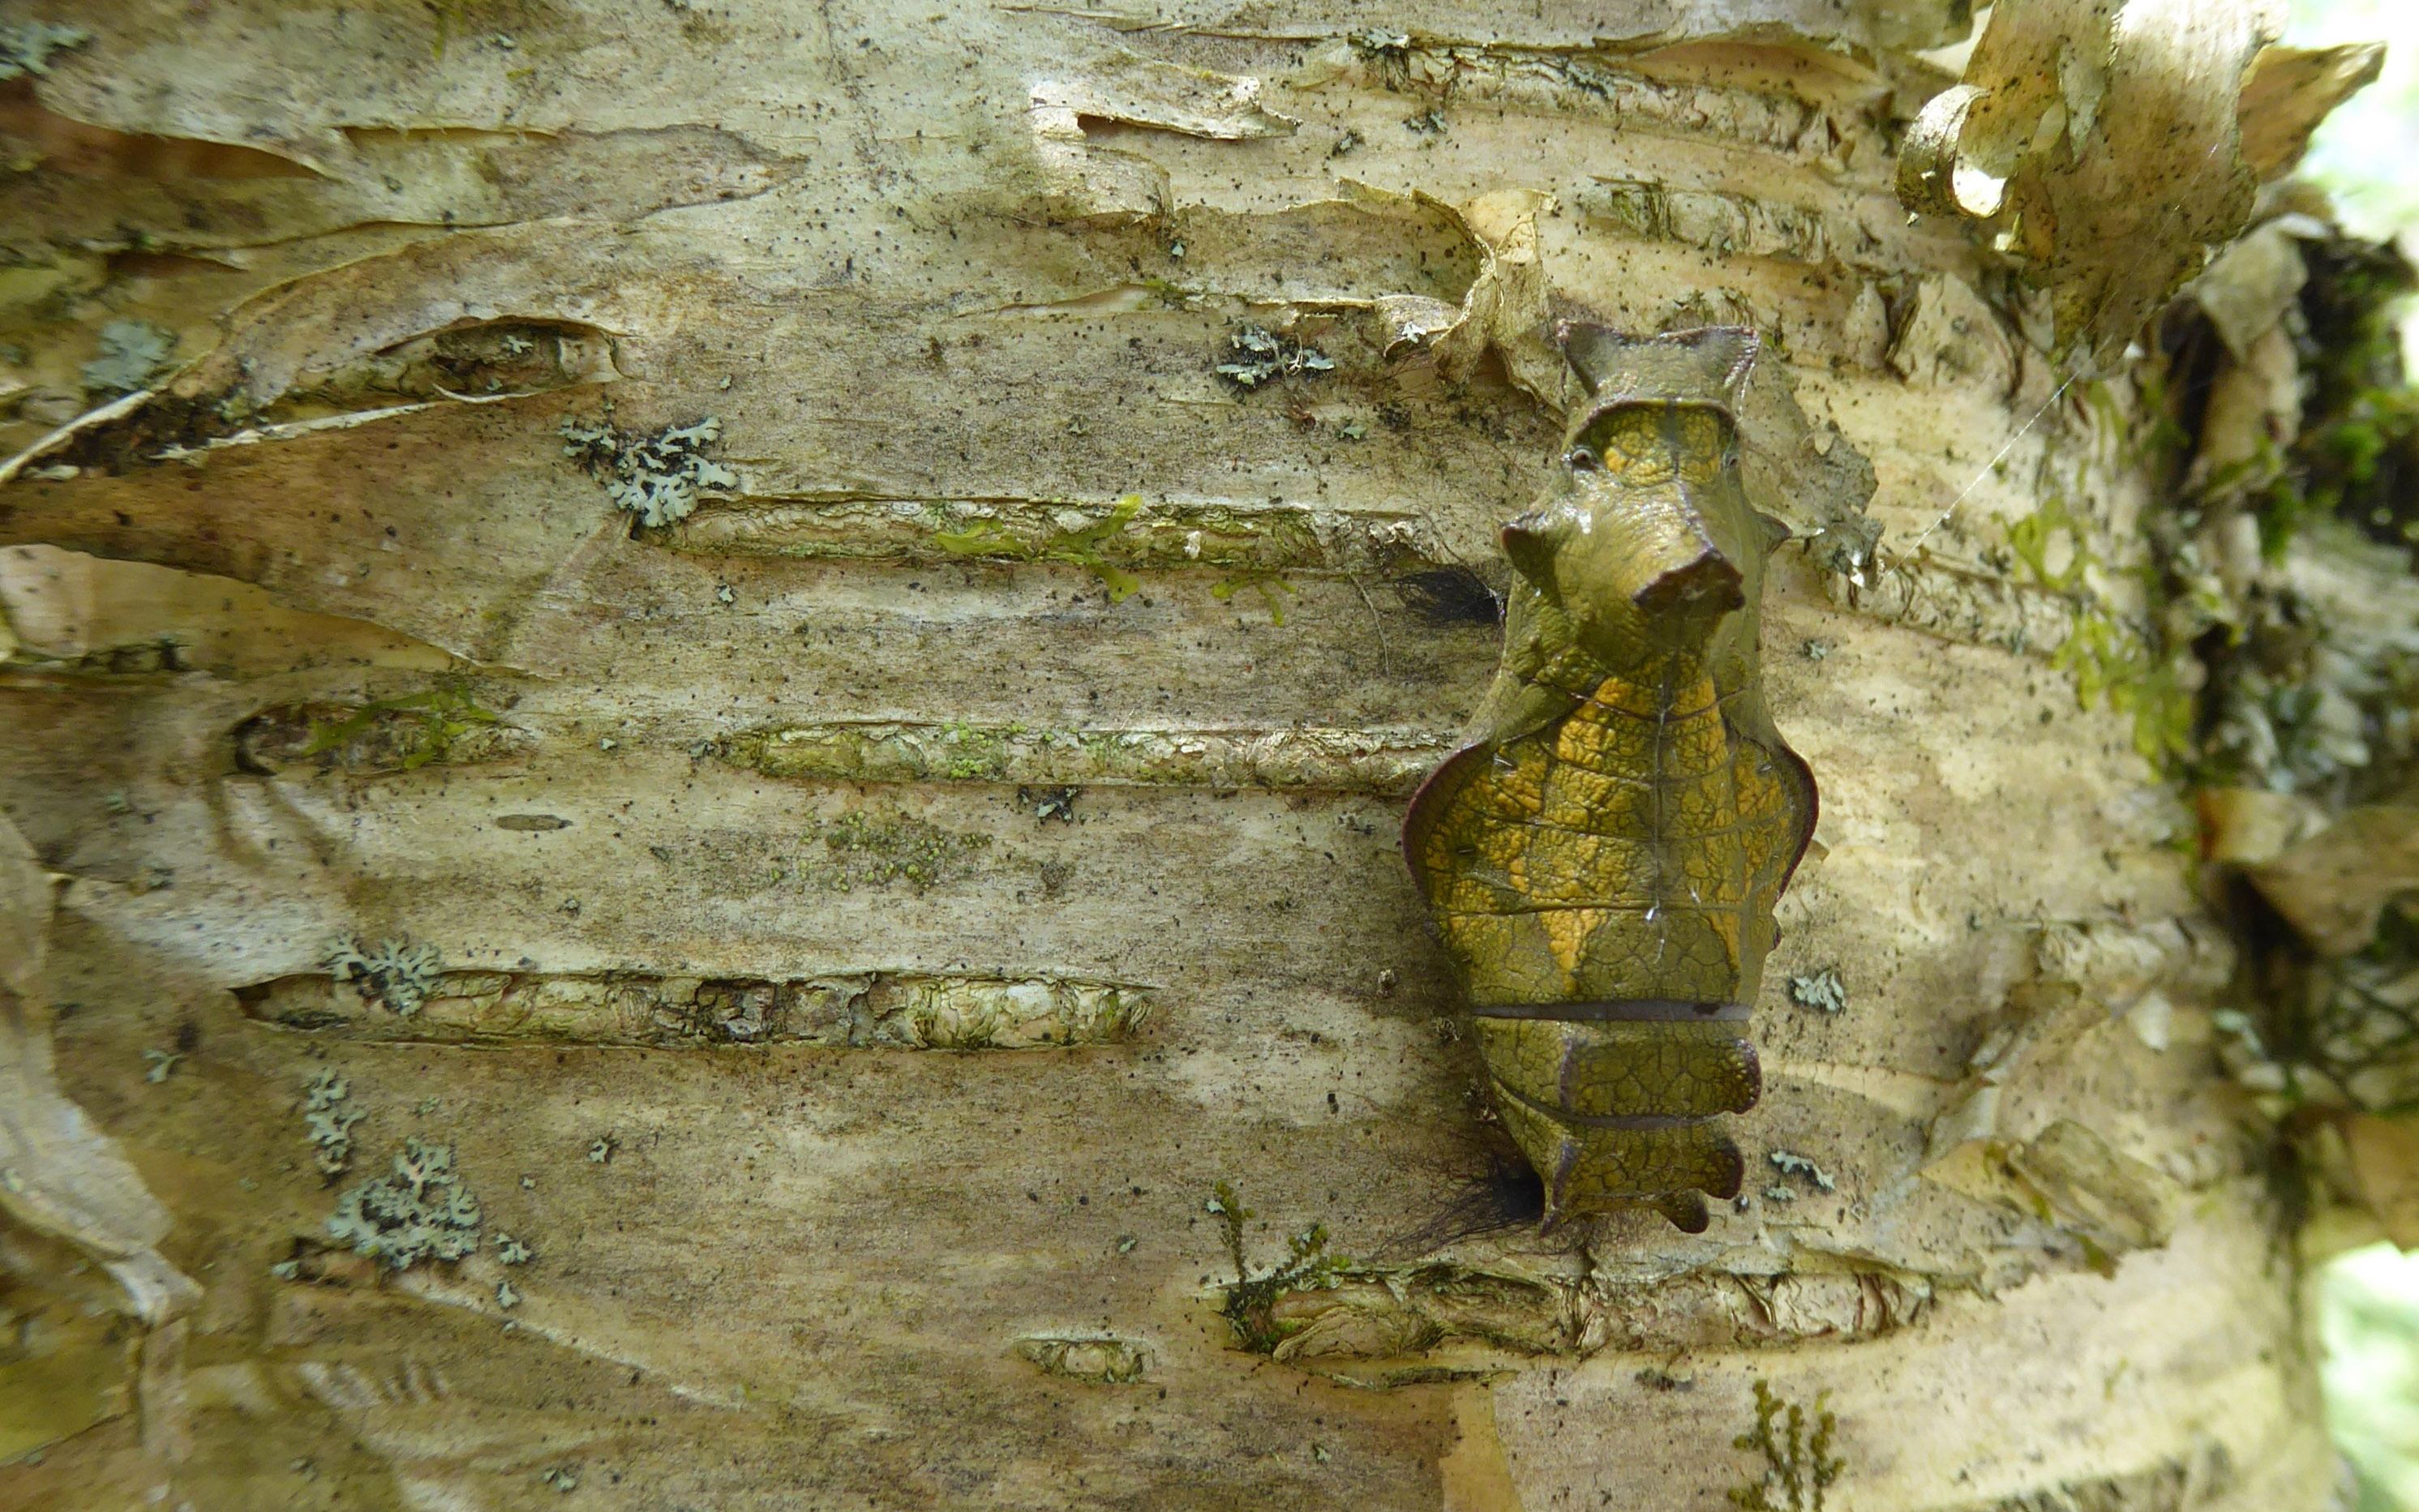 The yellow-brown color and irregular shape of this pipevine swallowtail butterfly chrysalis makes it difficult to see against the bark.